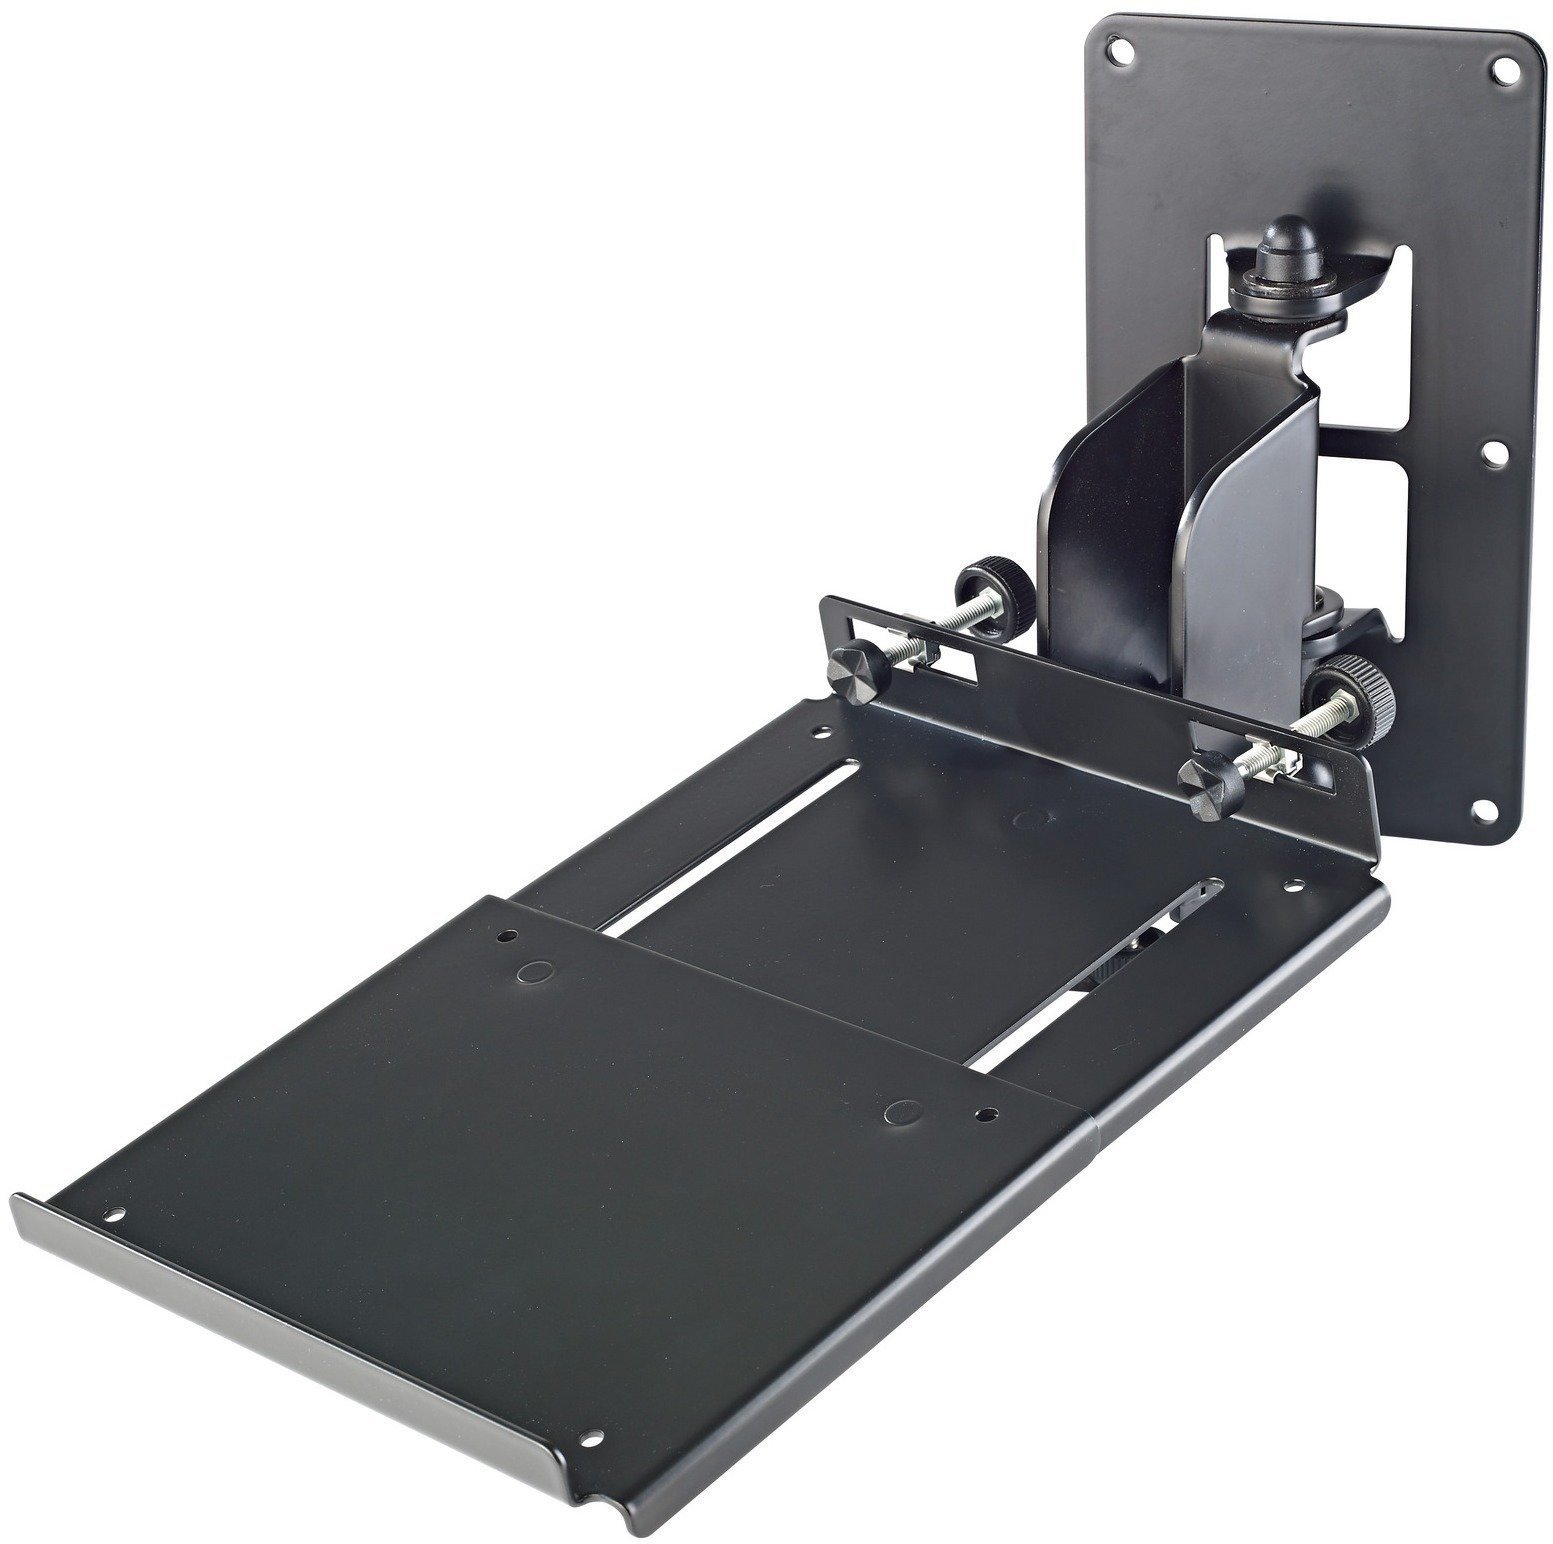 Wall mount for speakerboxes Konig & Meyer 24171 Wall mount for speakerboxes